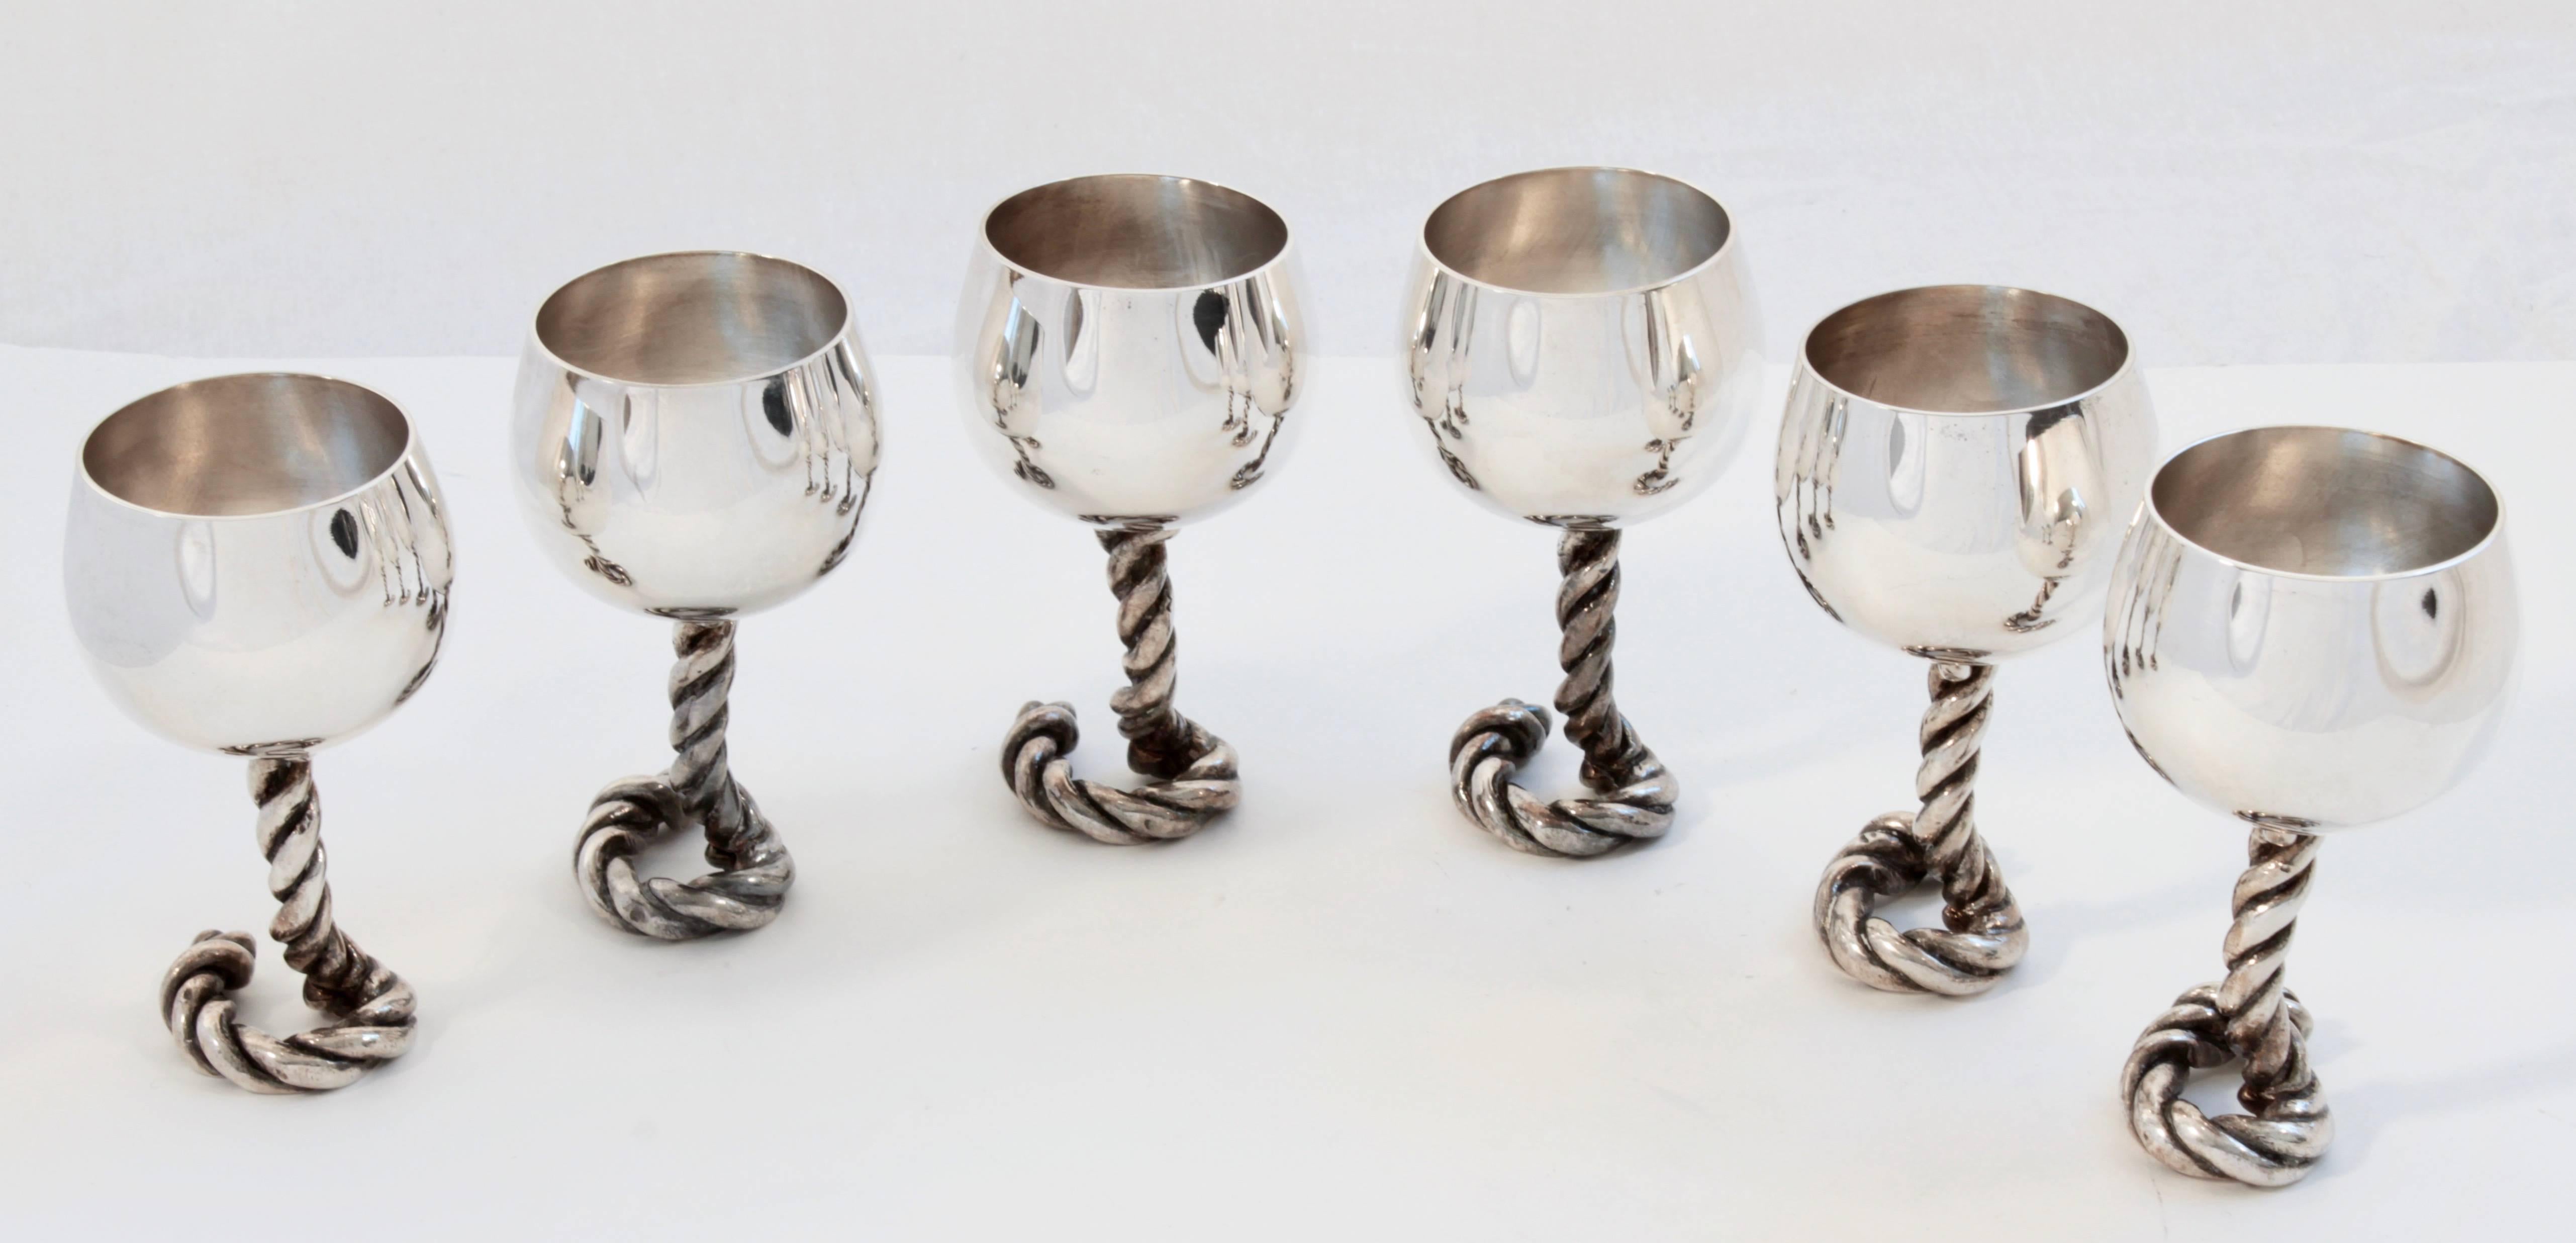 This set of 6 silver goblets was made by Gucci, most likely in the early 1970s.  Each goblet features a chunky equestrian rope stem and measures appx 5.25in H x 3in D.  Perfect for entertaining or for the barware enthusiast.  All in good condition